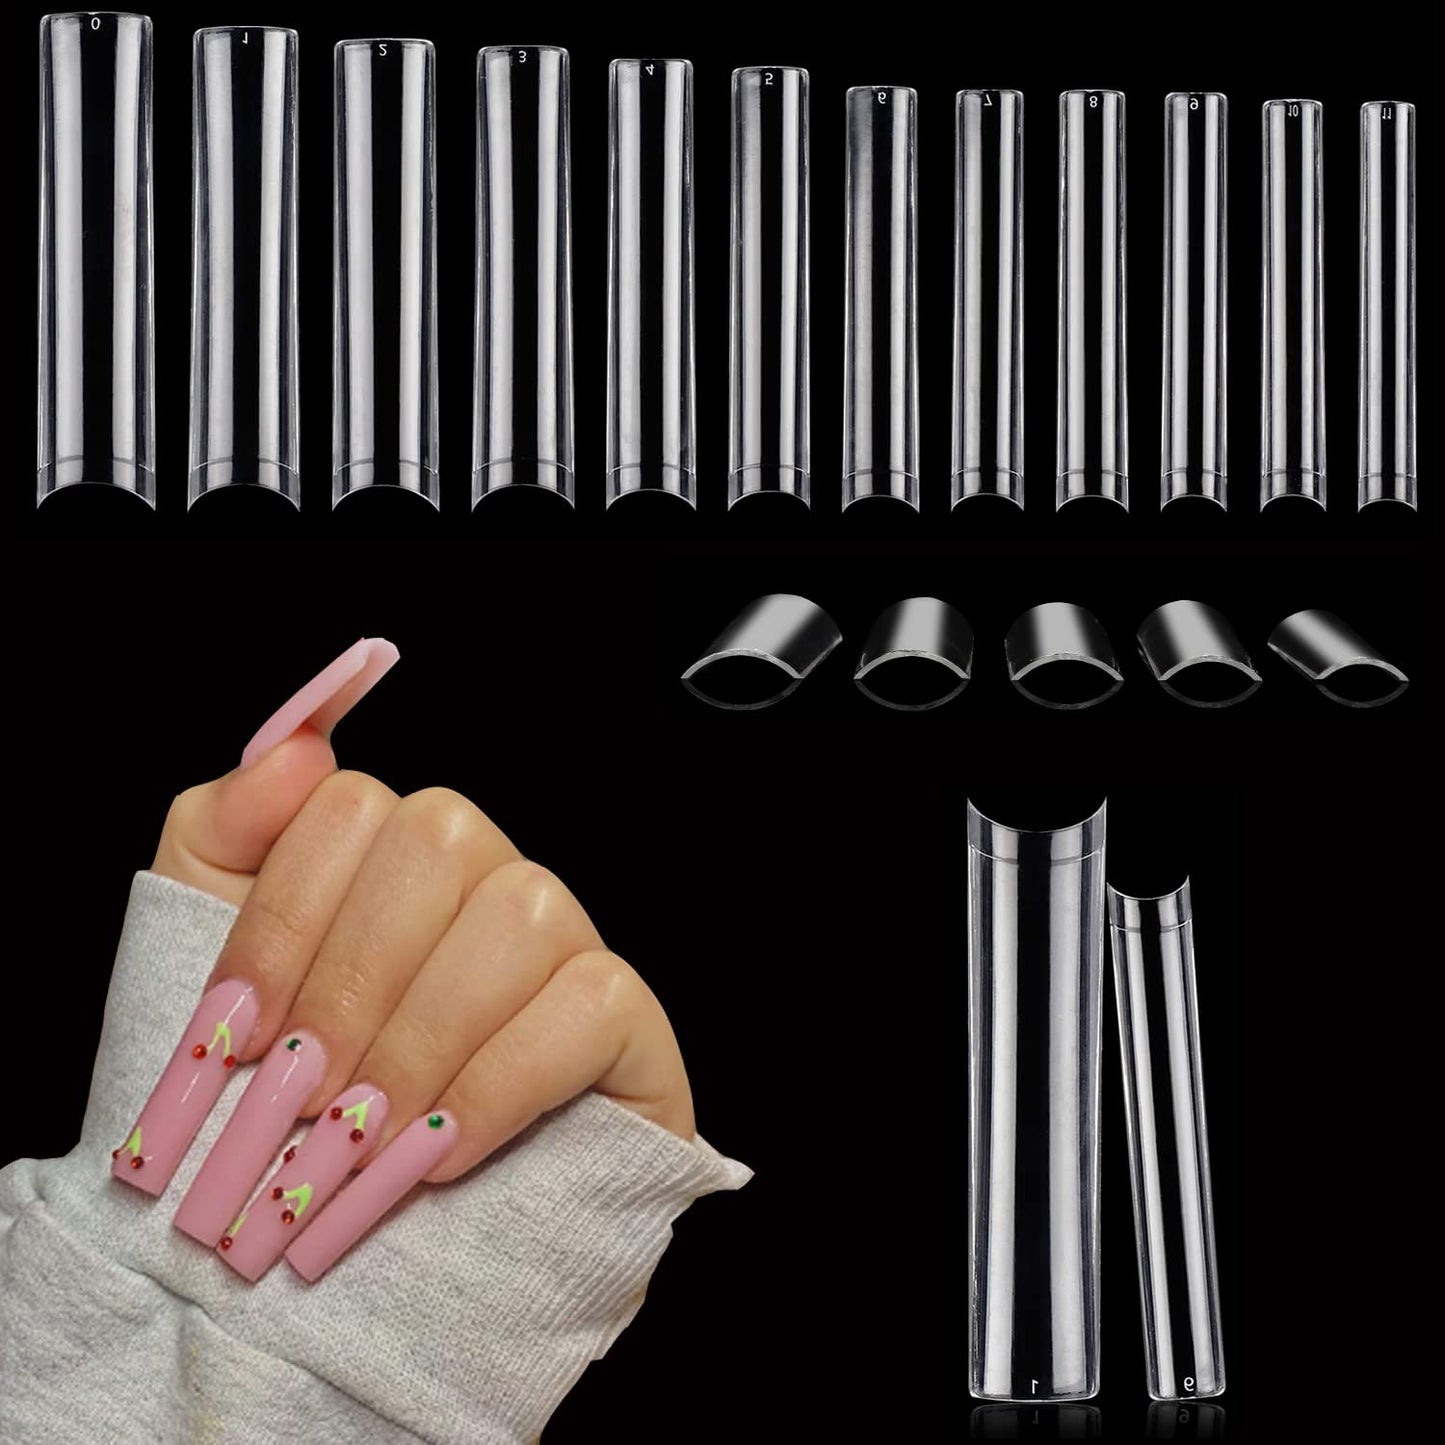 504 PCS No C Curve Clear Nail Tips for Acrylic Nails Professional, 3XL Extra Long, 12 Sizes Half Cover Straight Tapered Square French Fake Nail Tips for Nail Salons Home DIY